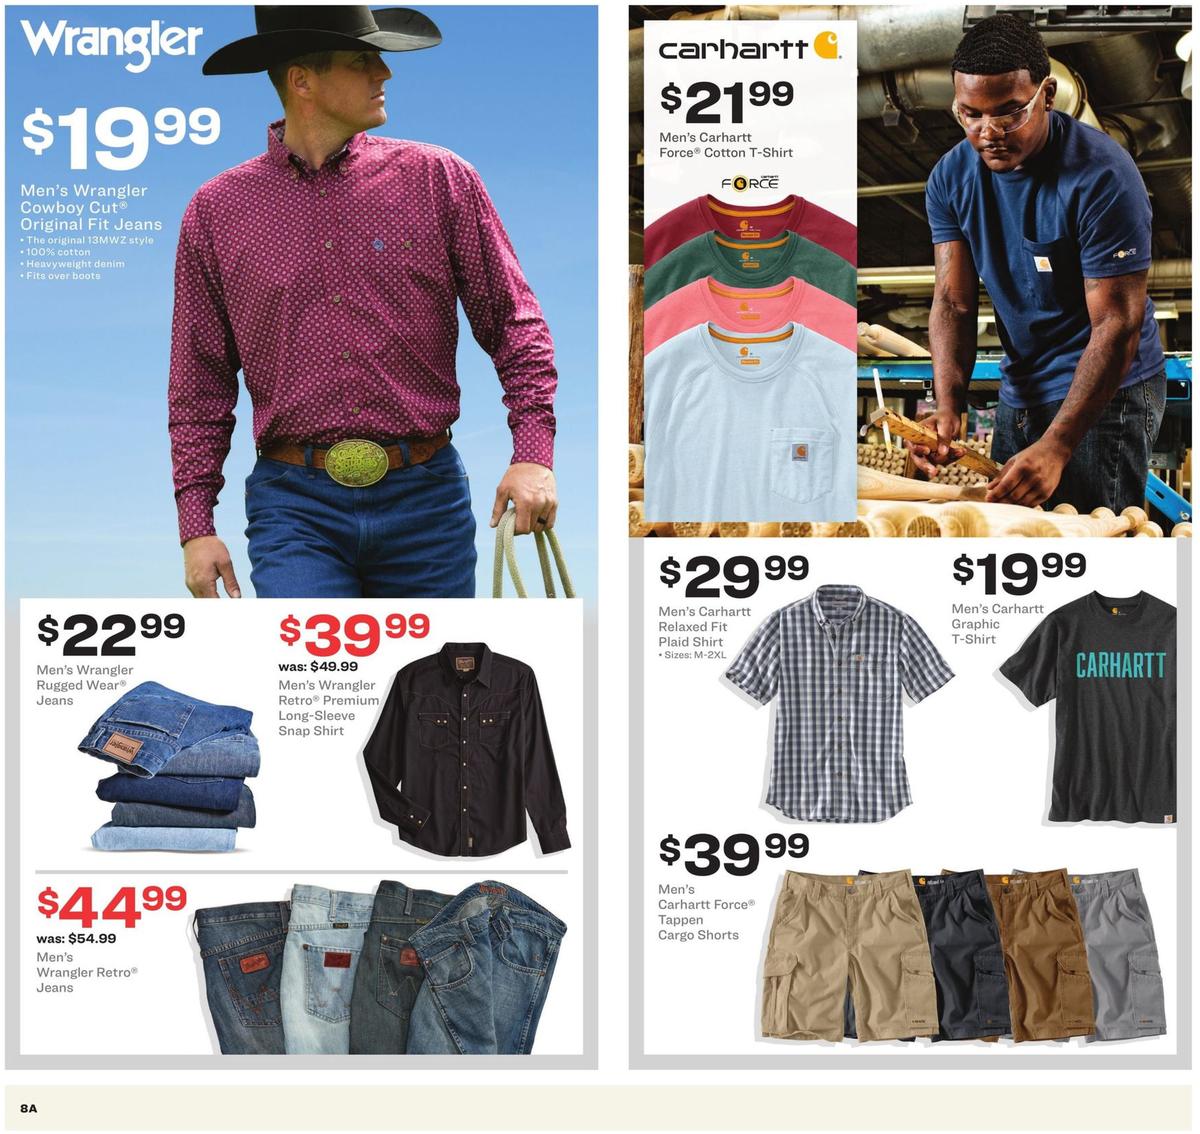 Academy Sports + Outdoors Outdoor Ad Weekly Ad from March 2